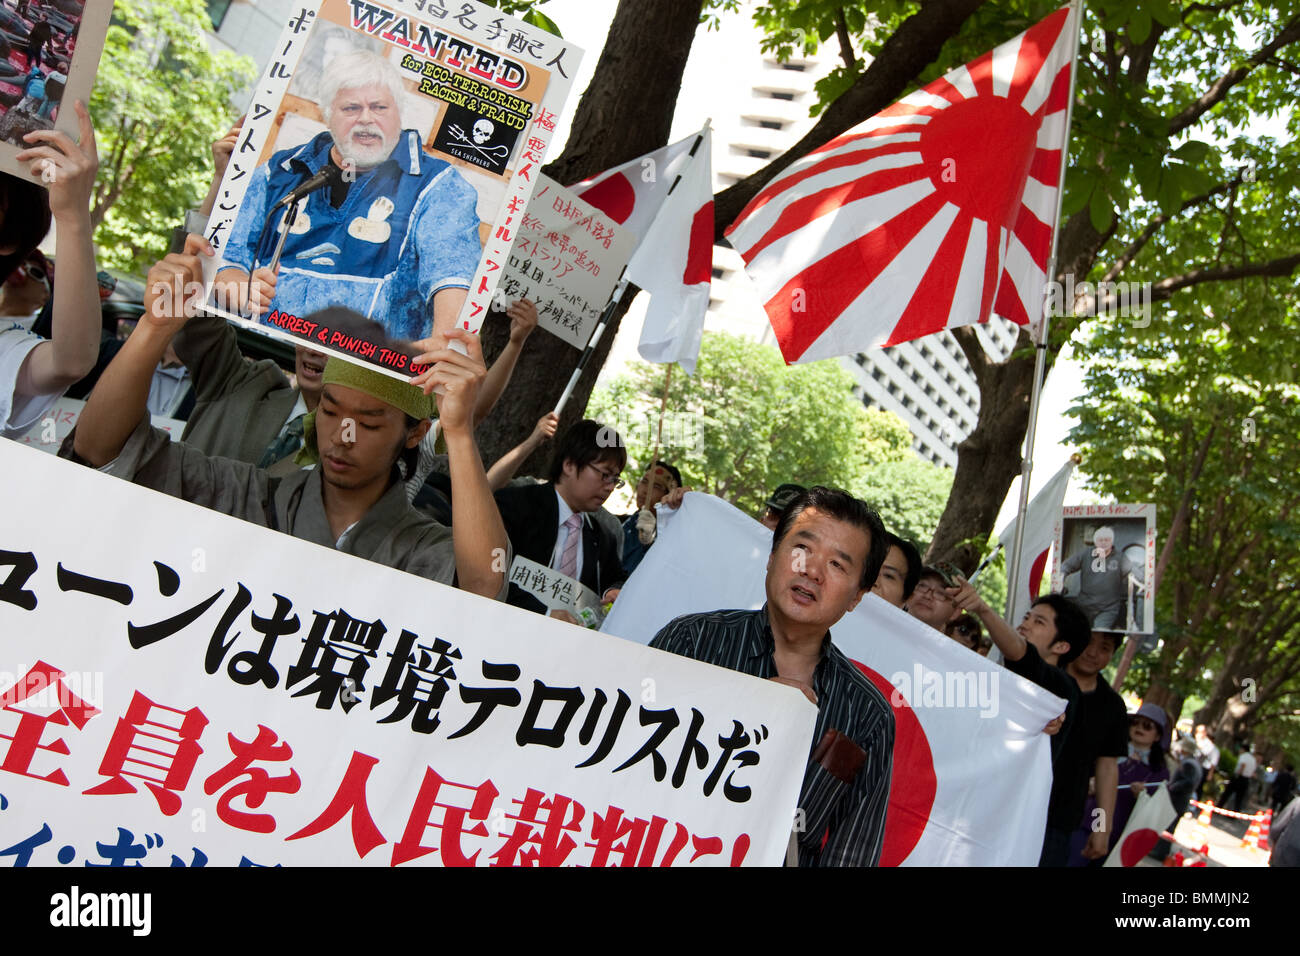 Japanese right wing protest against Sea Shepherd and Pete Bethune, and in favour of whaling. Tokyo, Japan, June 2010. Stock Photo